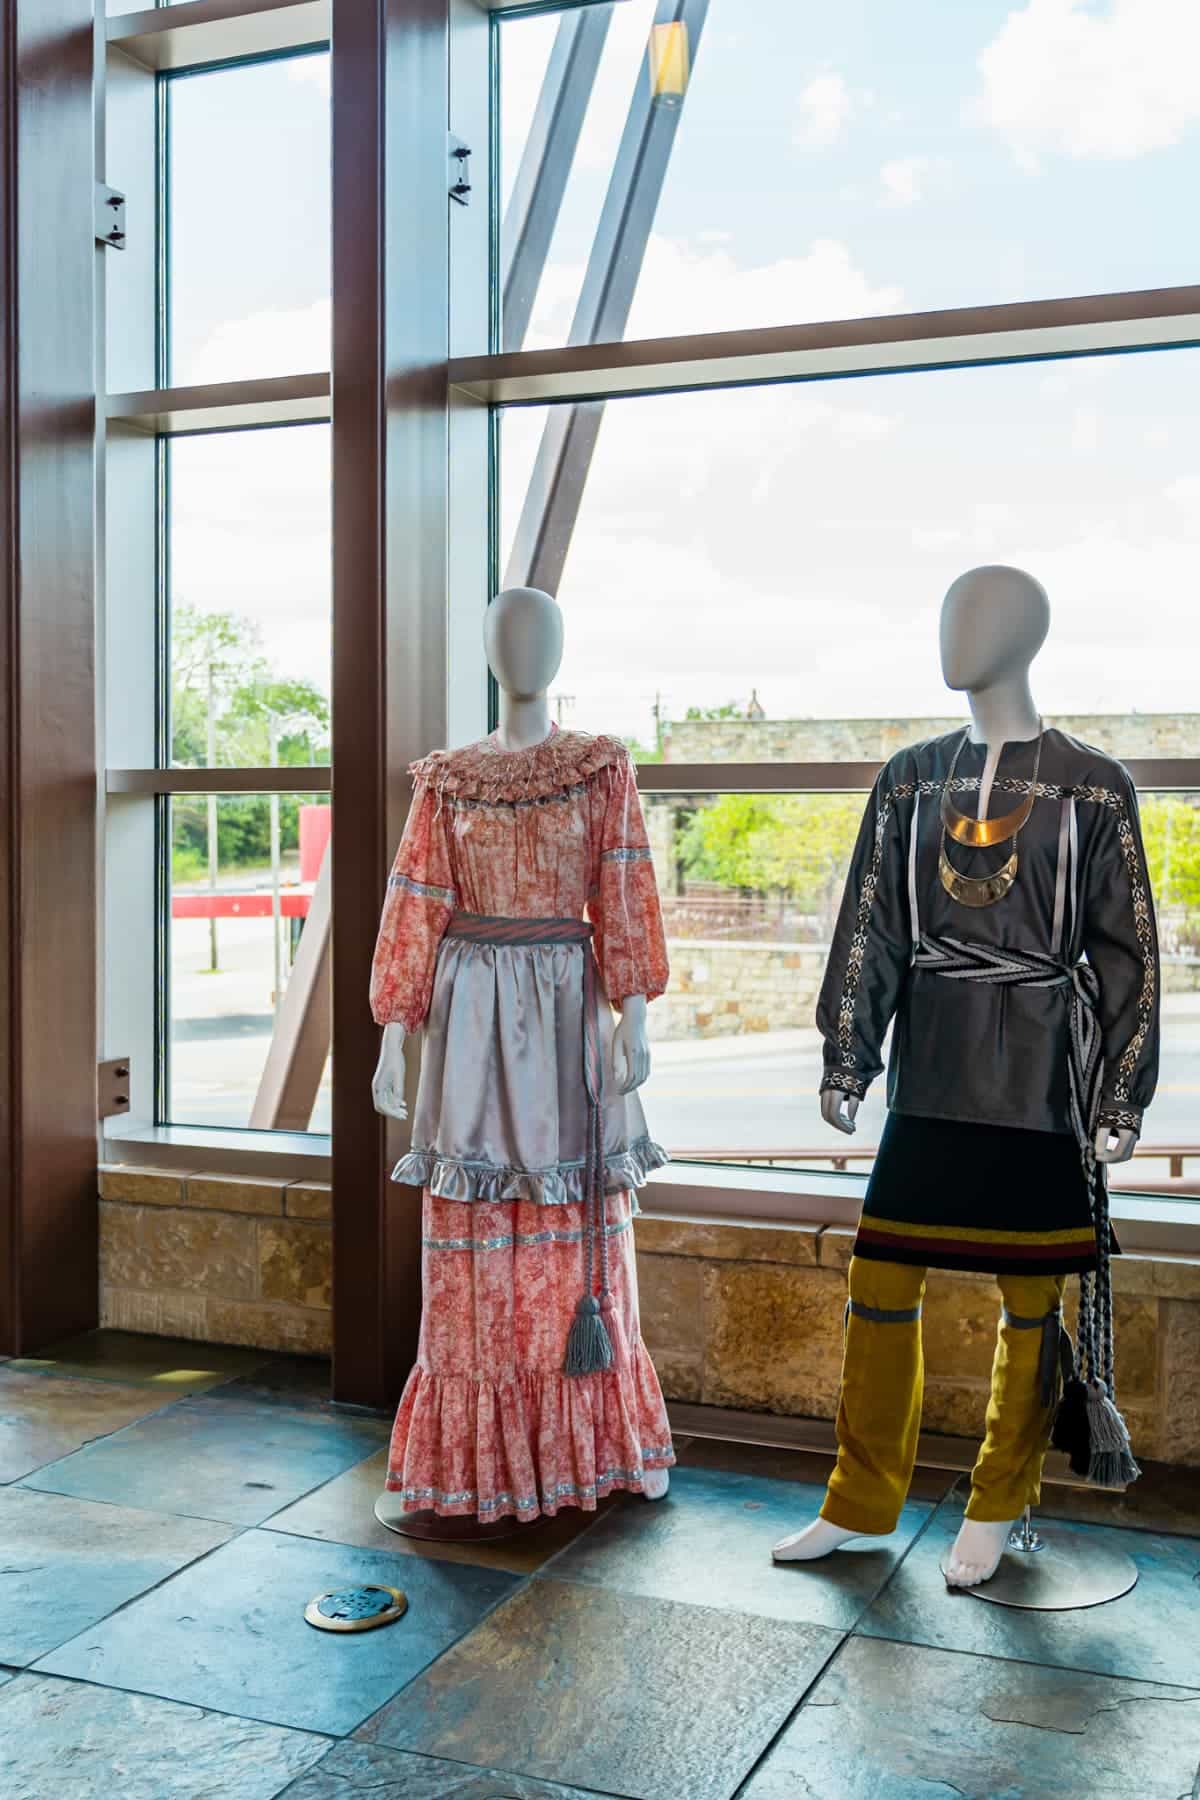 Native outfits on display mannequins